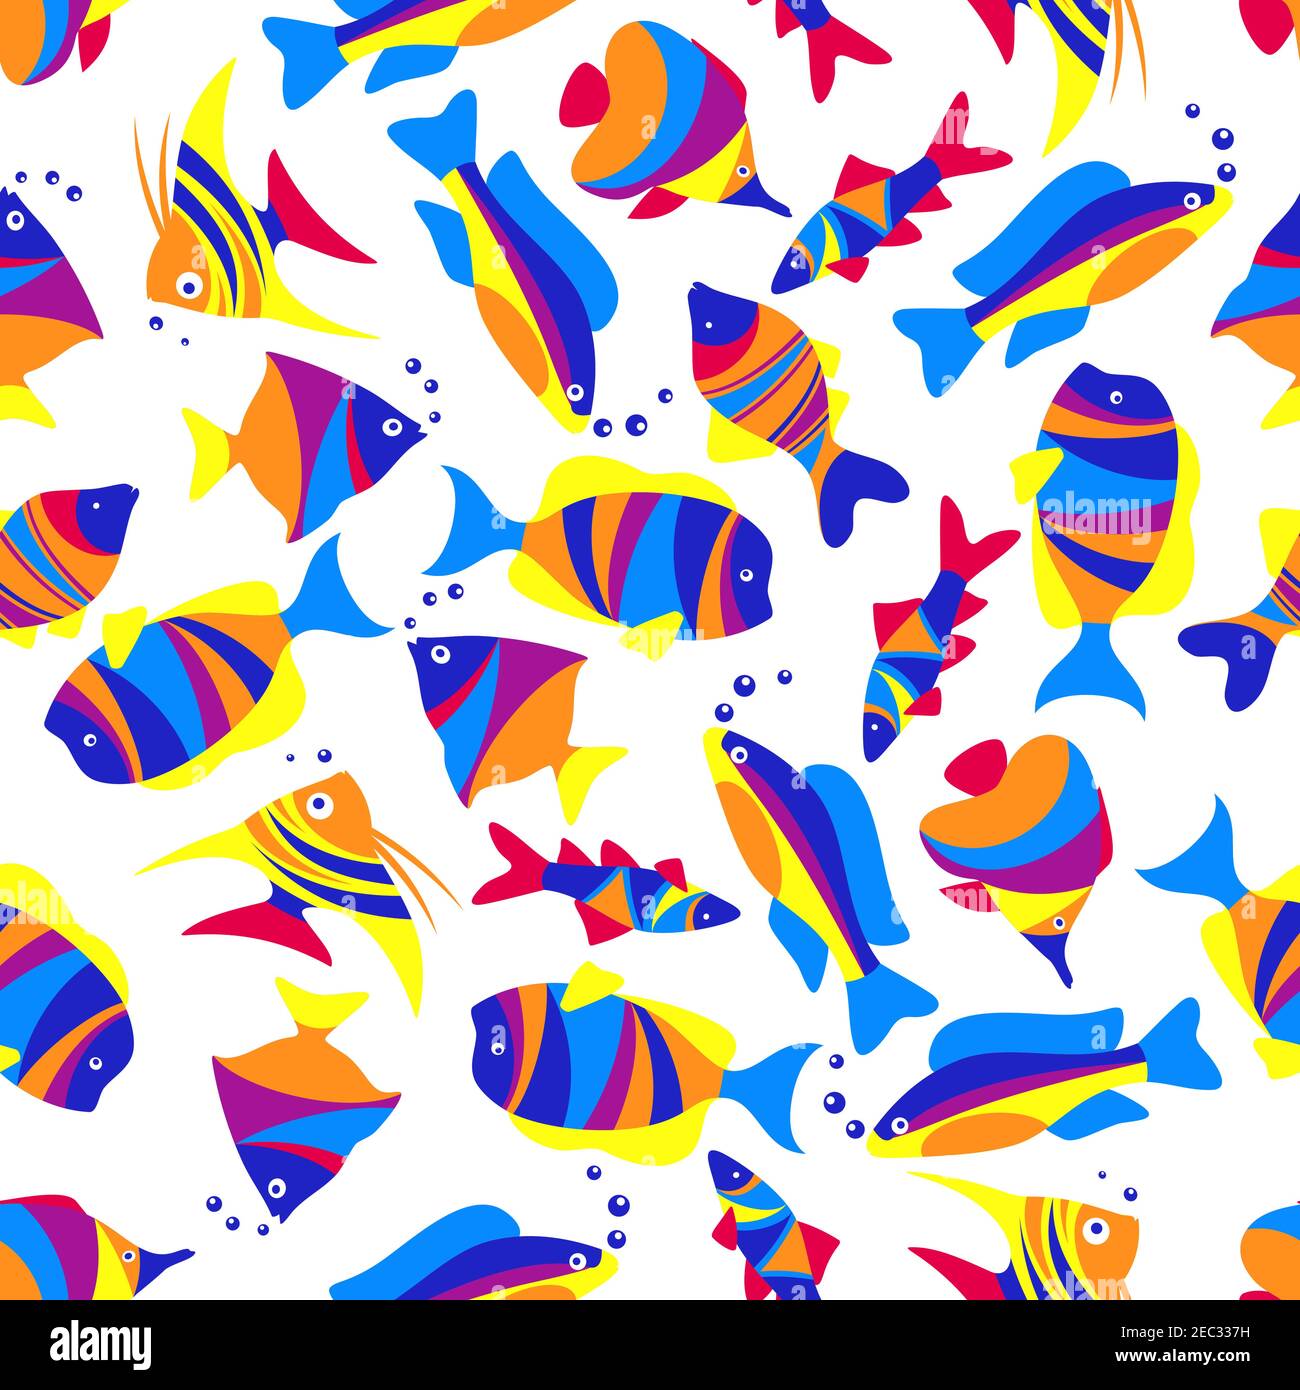 Bright seamless tropical sea life pattern of swimming exotic fishes with colorful striped bodies, tails and fins over white background. Great for unde Stock Vector